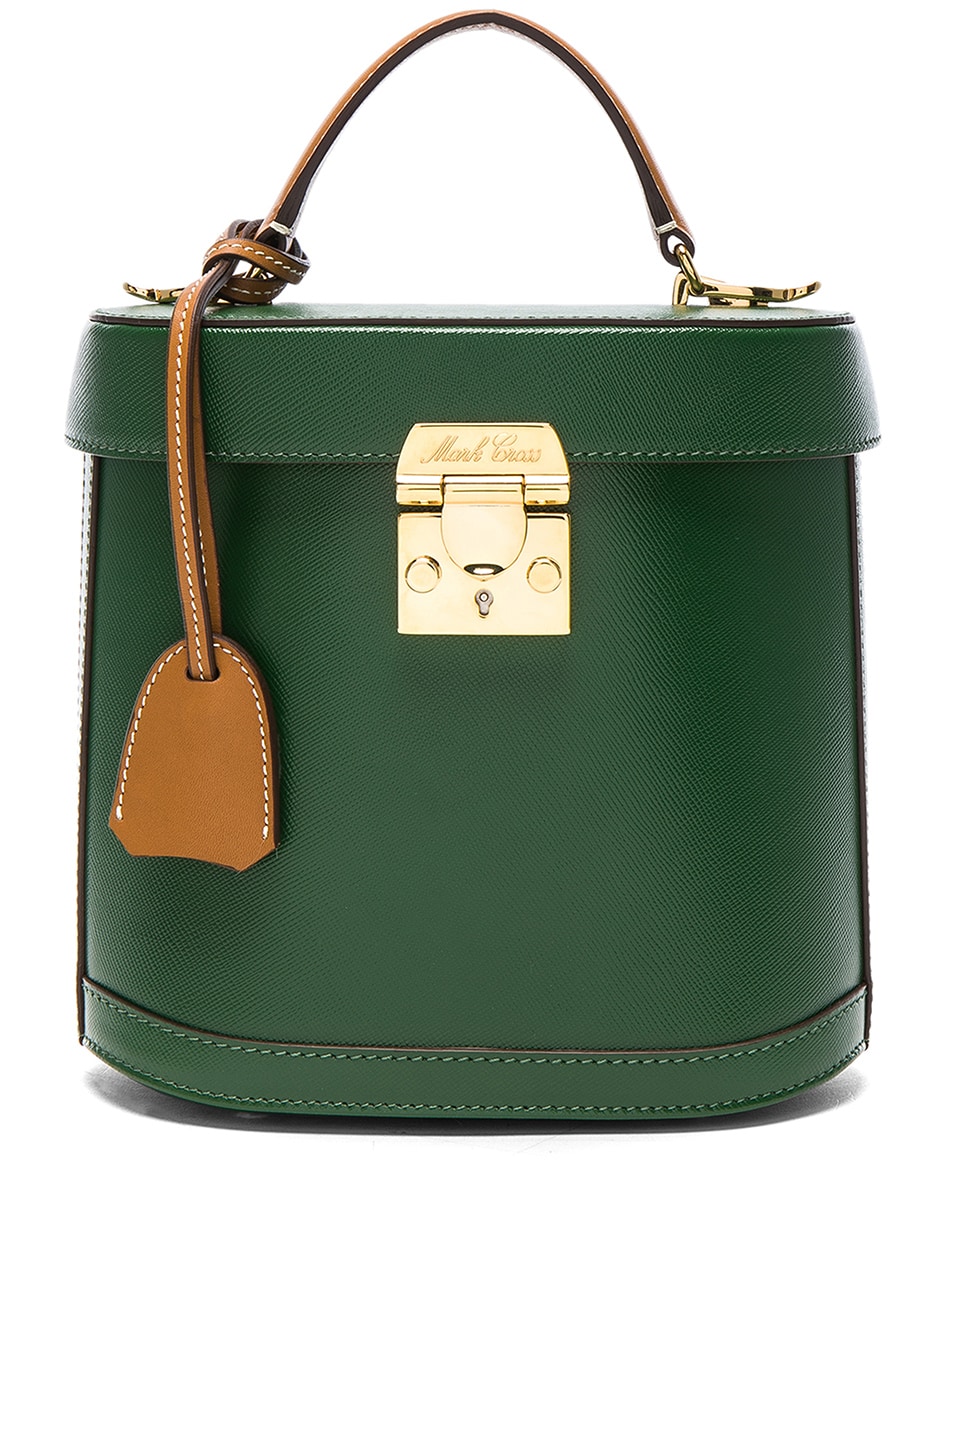 Image 1 of Mark Cross Bicolor Cross Grain & Smooth Calf Benchley Bag in Leaf Green & Luggage